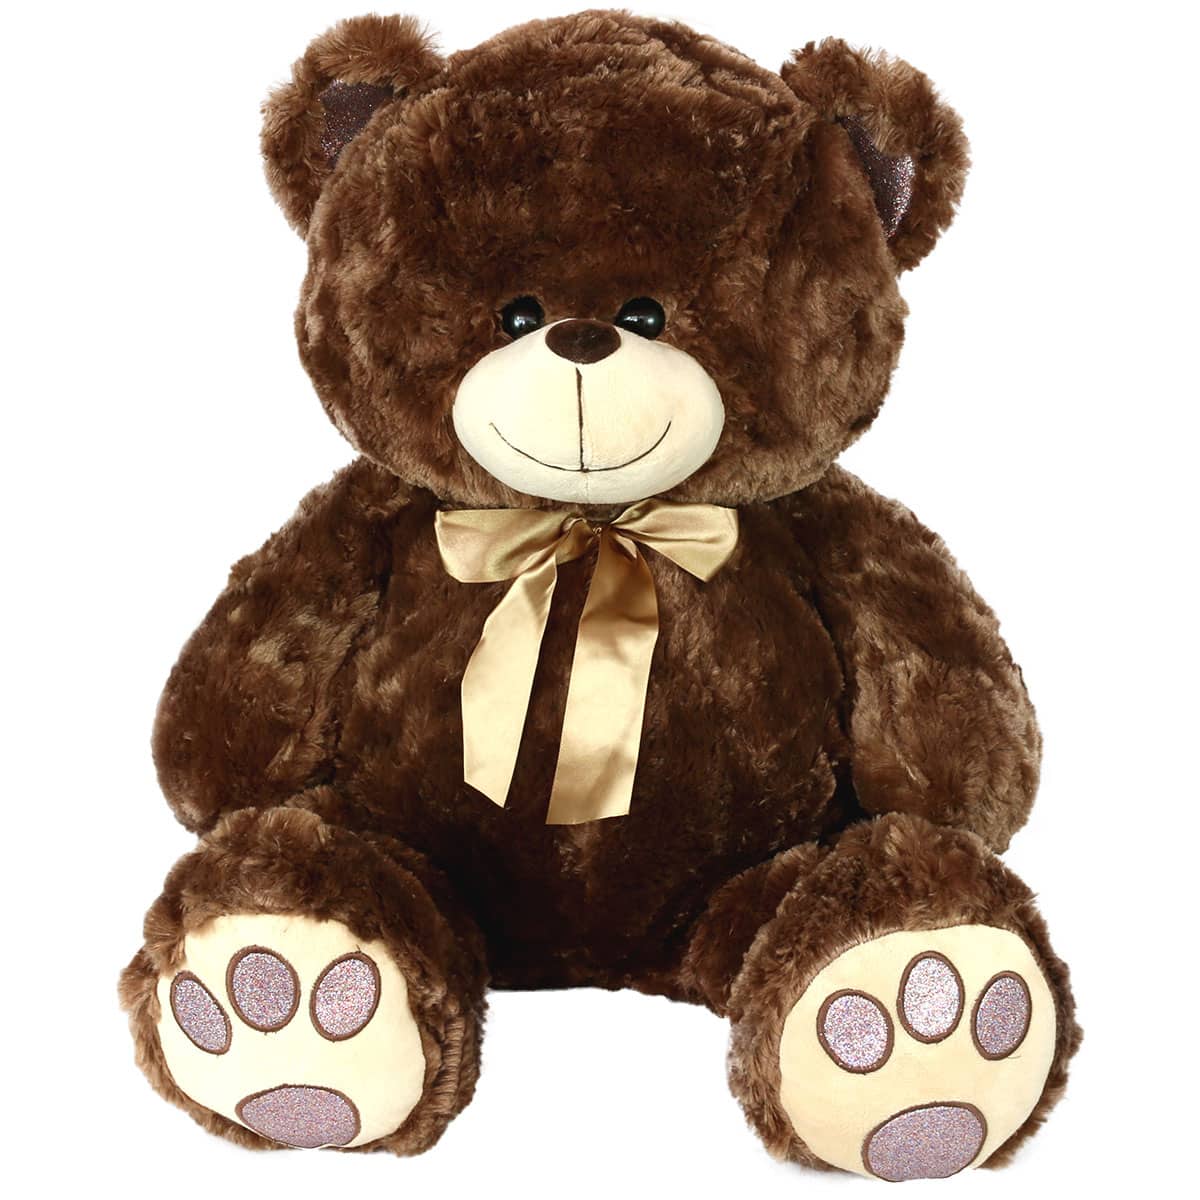 Bear with glitter paws - Brown